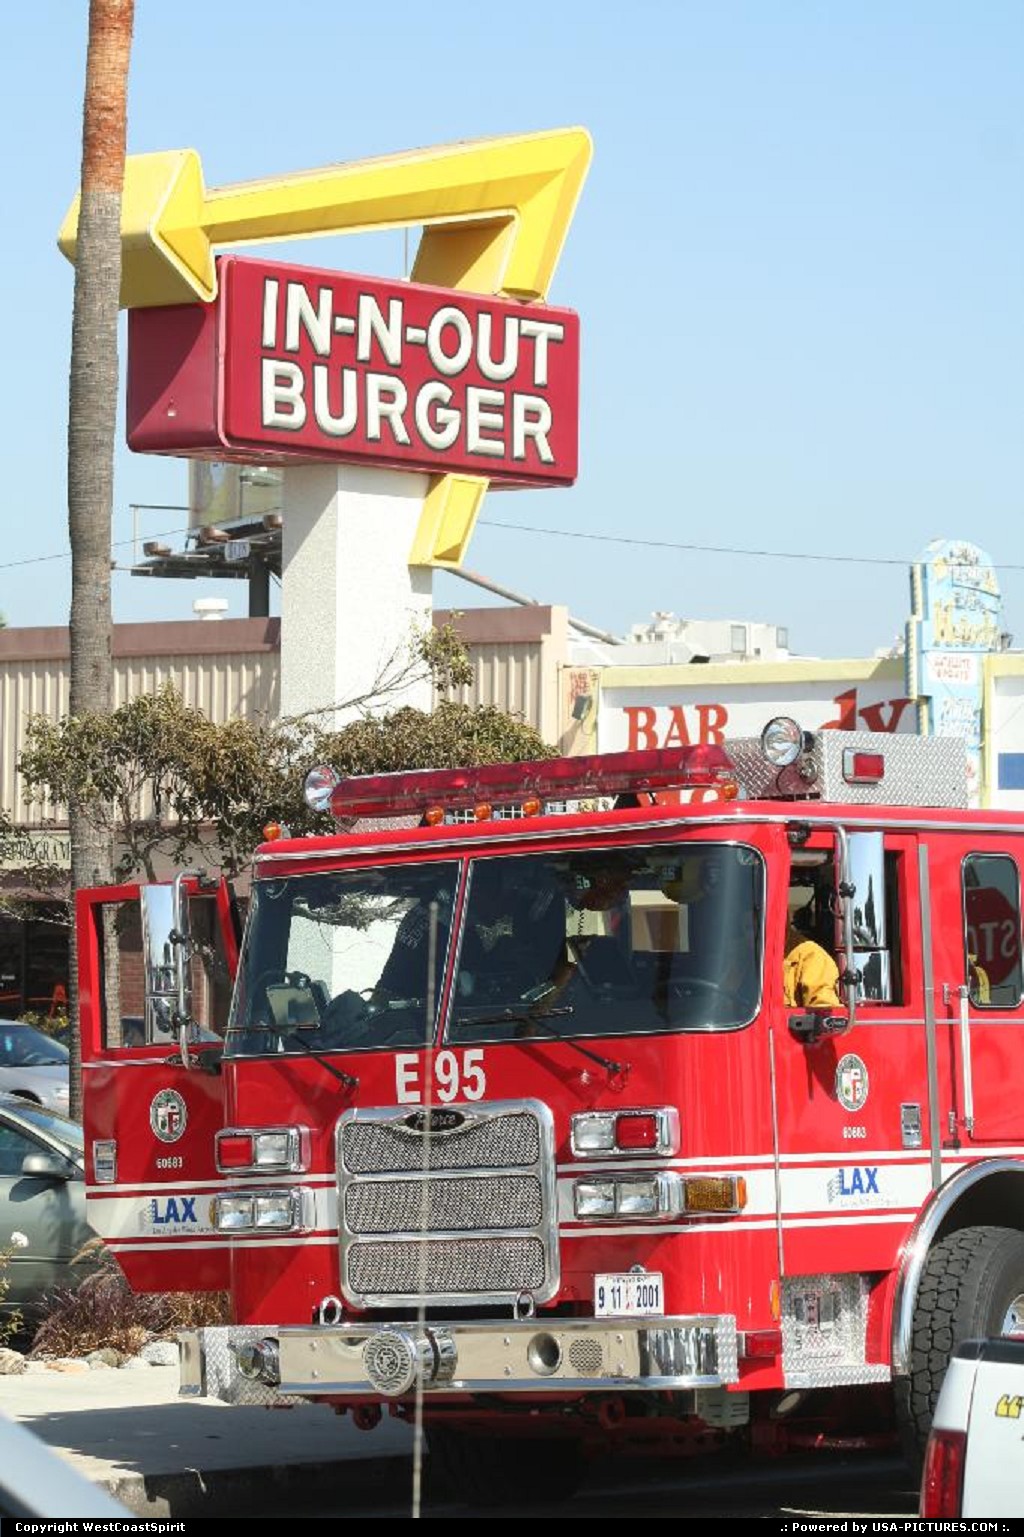 Picture by WestCoastSpirit: Los Angeles Californie   camion, pompiers, lax, burger, in n out